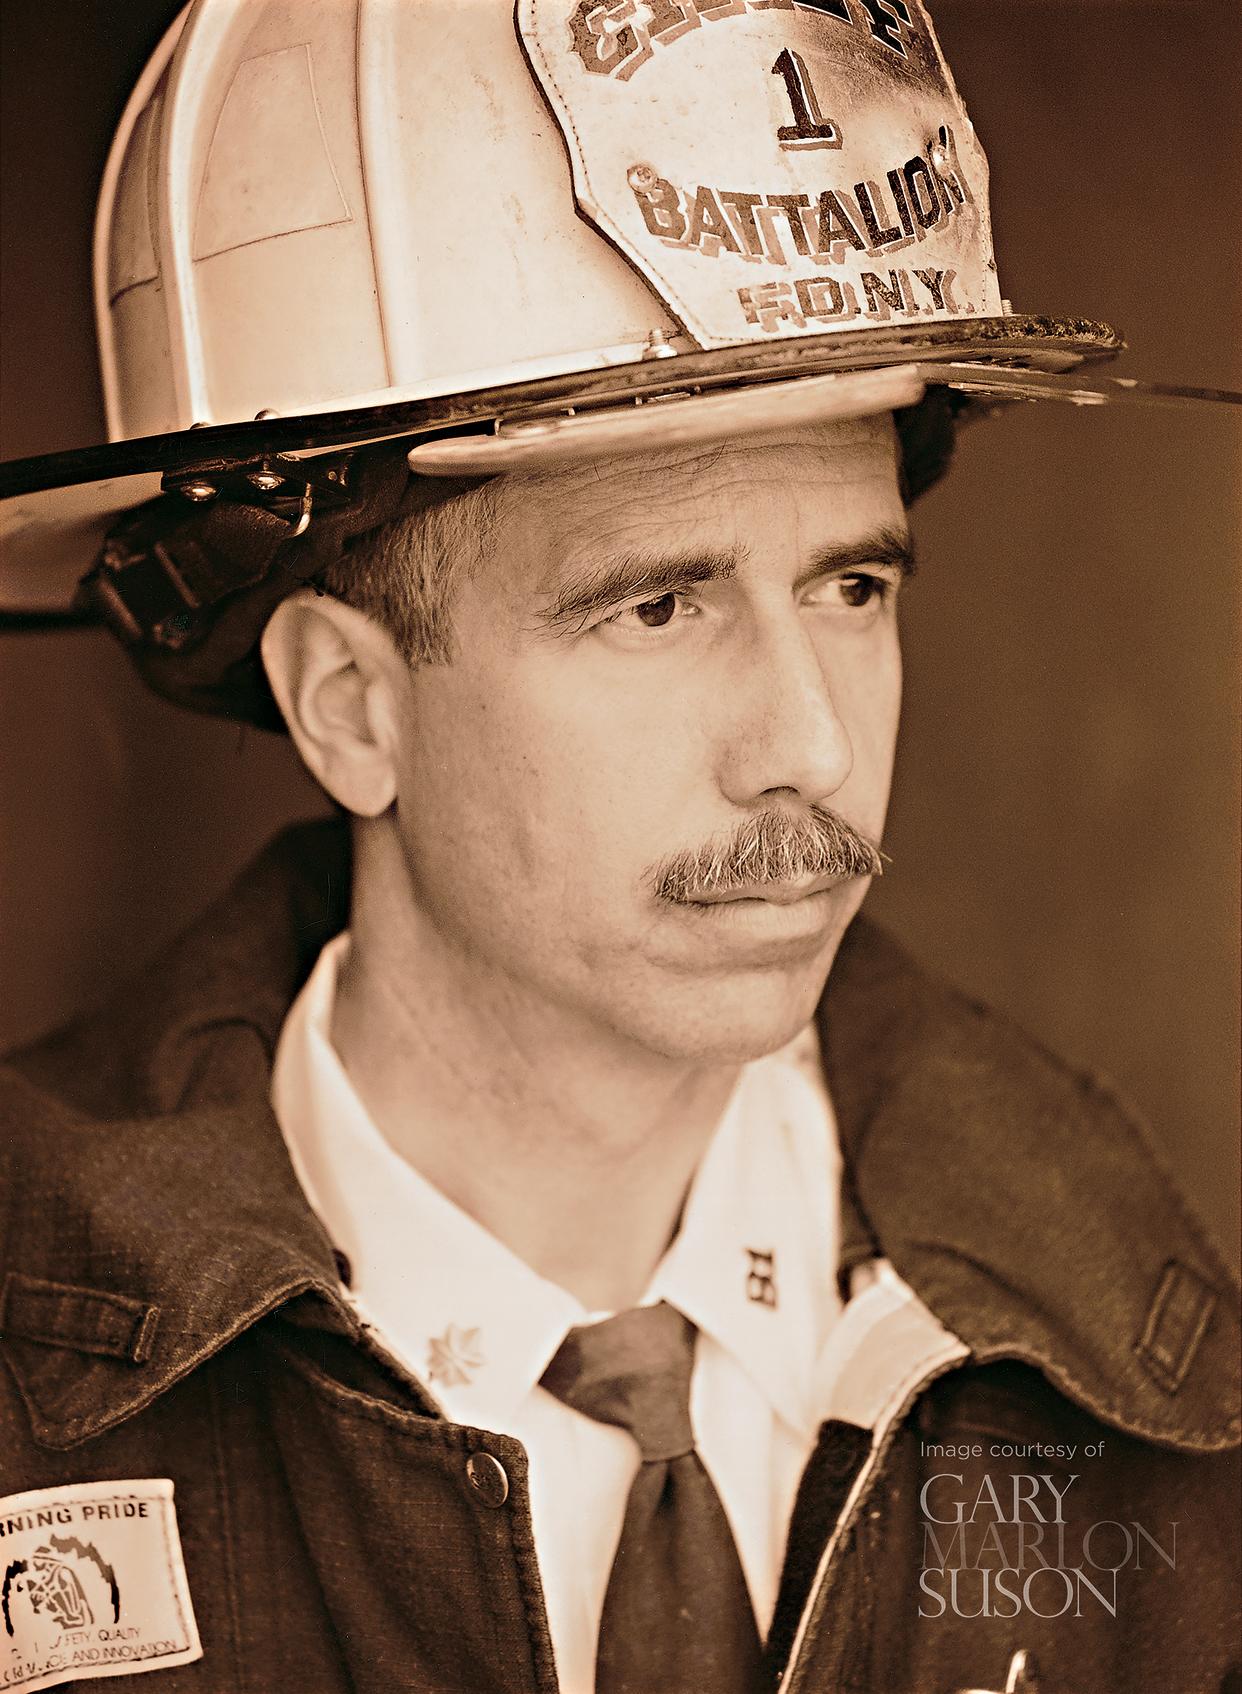 Official ground zero photographer Gary Marlon Suson took this photo of Chief Pfeifer in 2002. Pfeifer wore the same tie he had on the morning of 9/11. (Gary Marlon Suson)